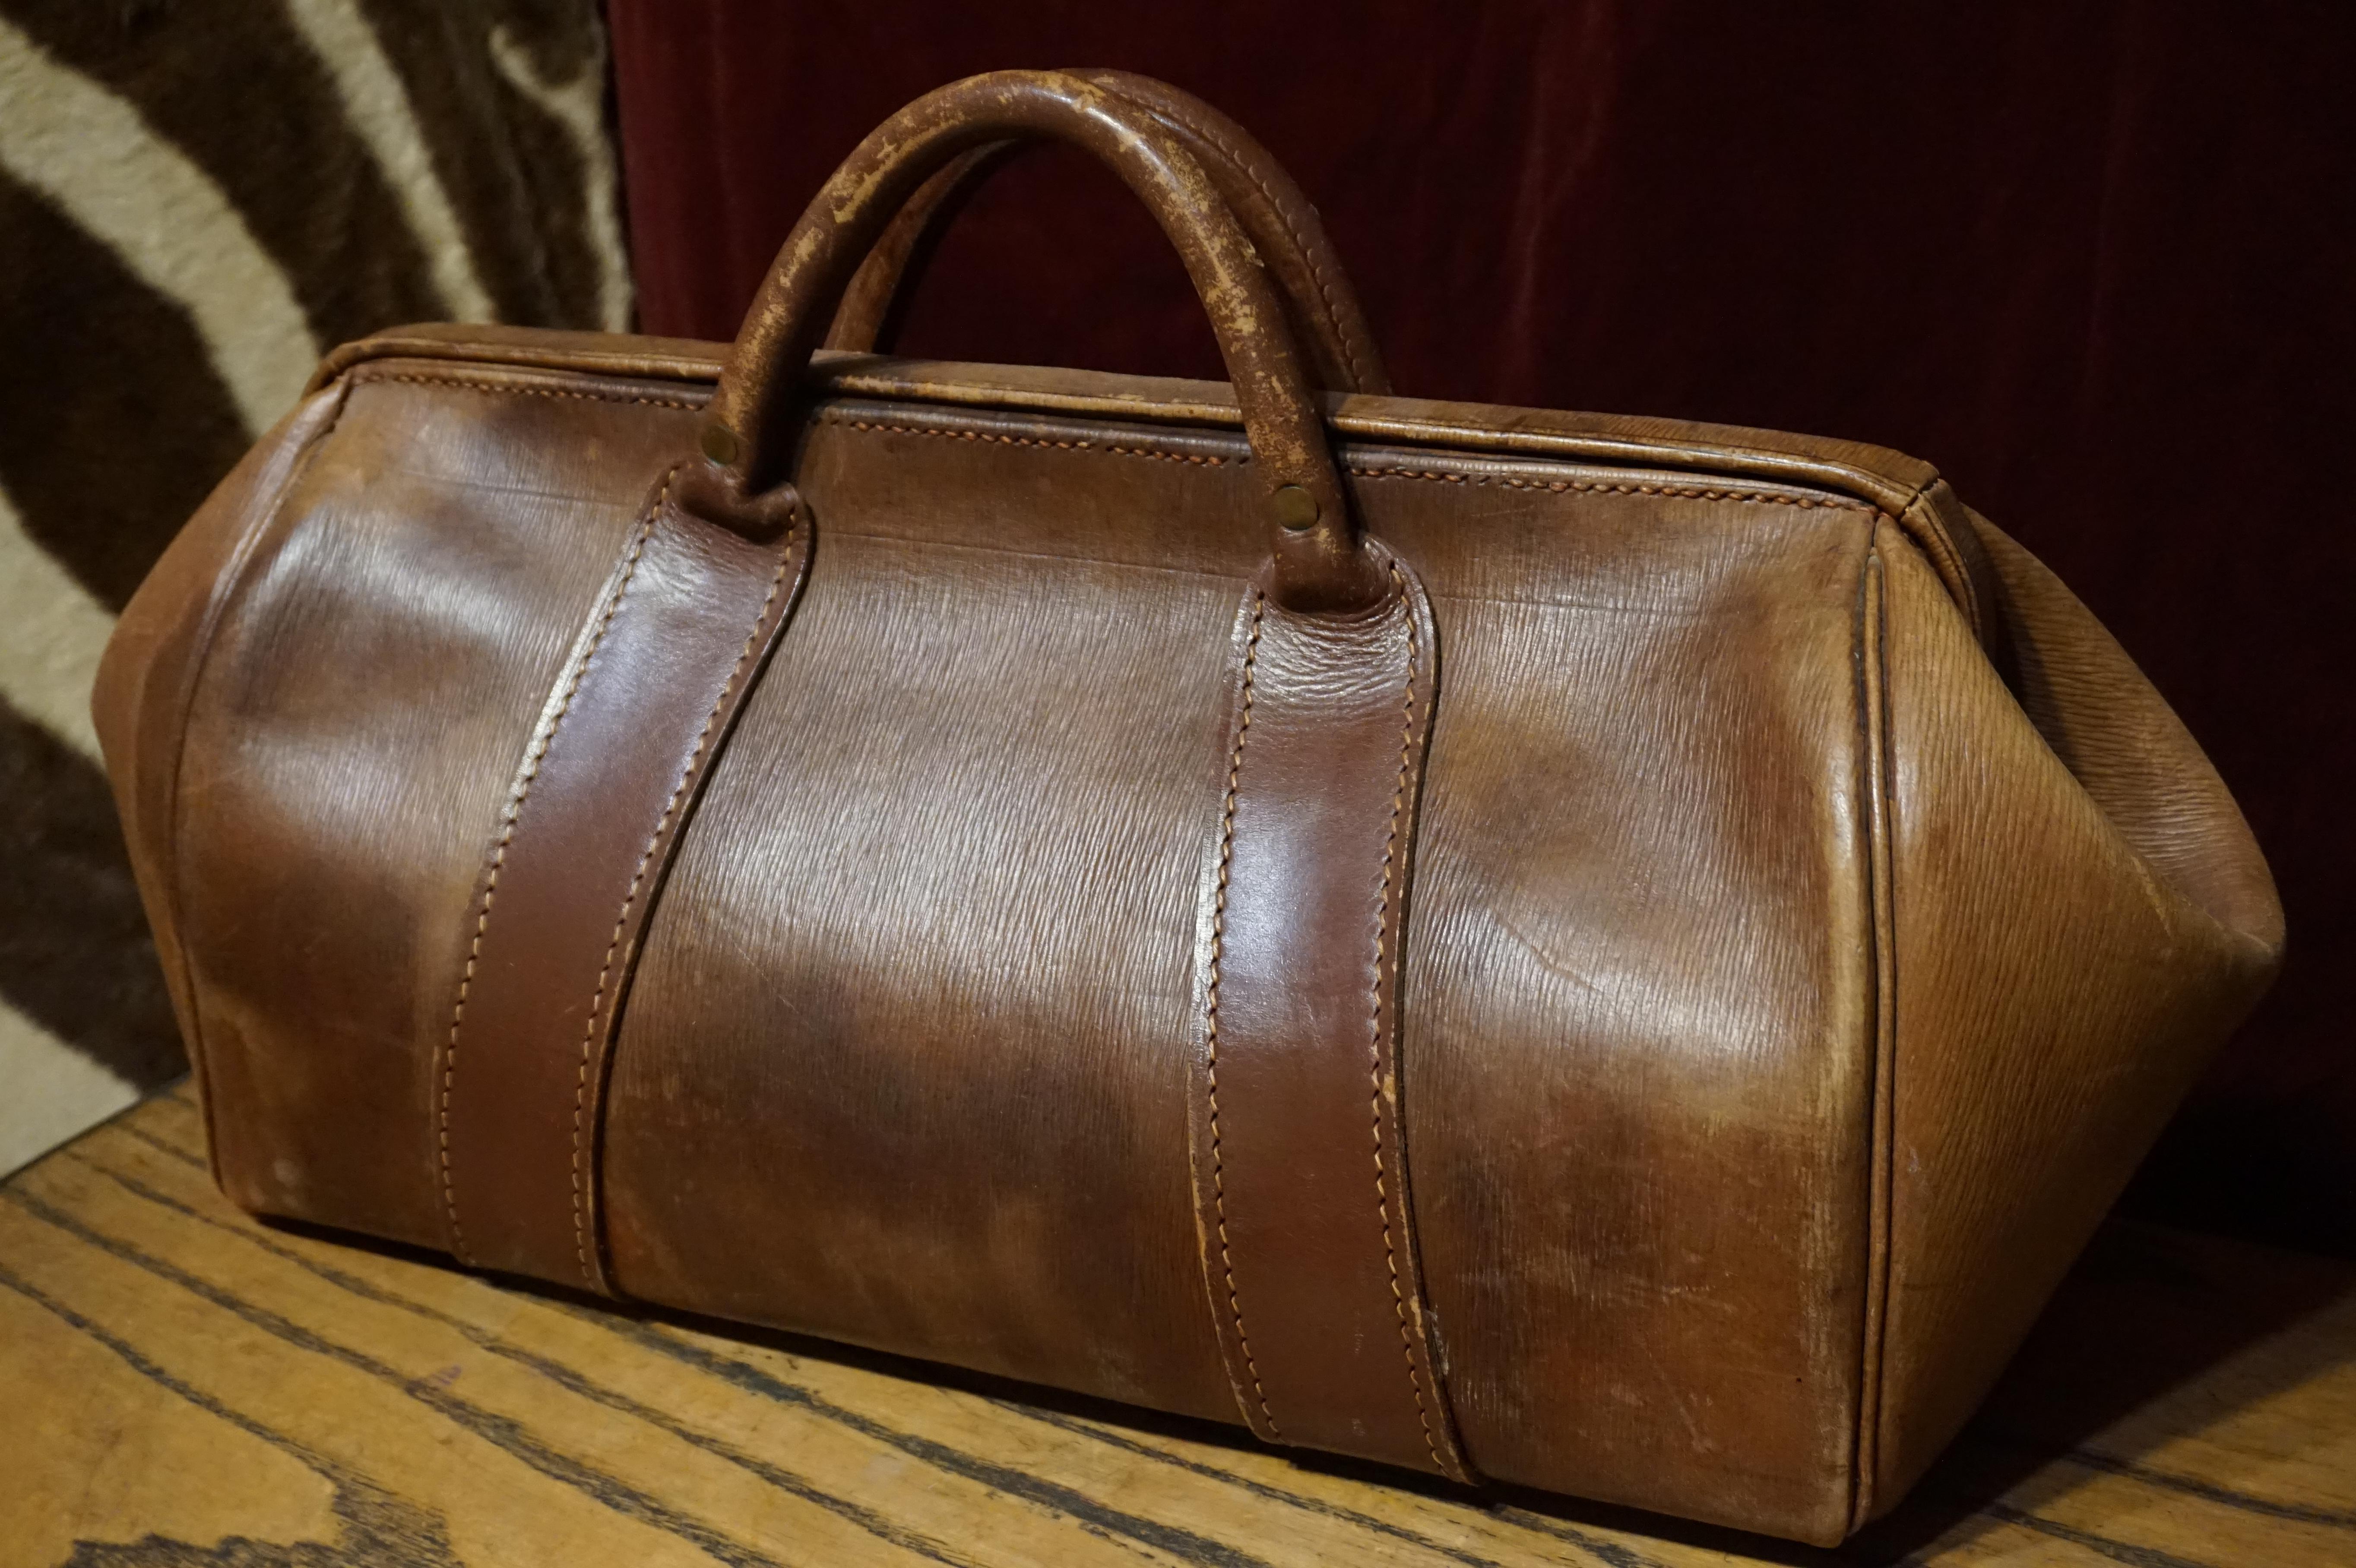 Mid-20th Century High Quality Antique English Leather Weekender Gladstone Bag with Brass Fittings